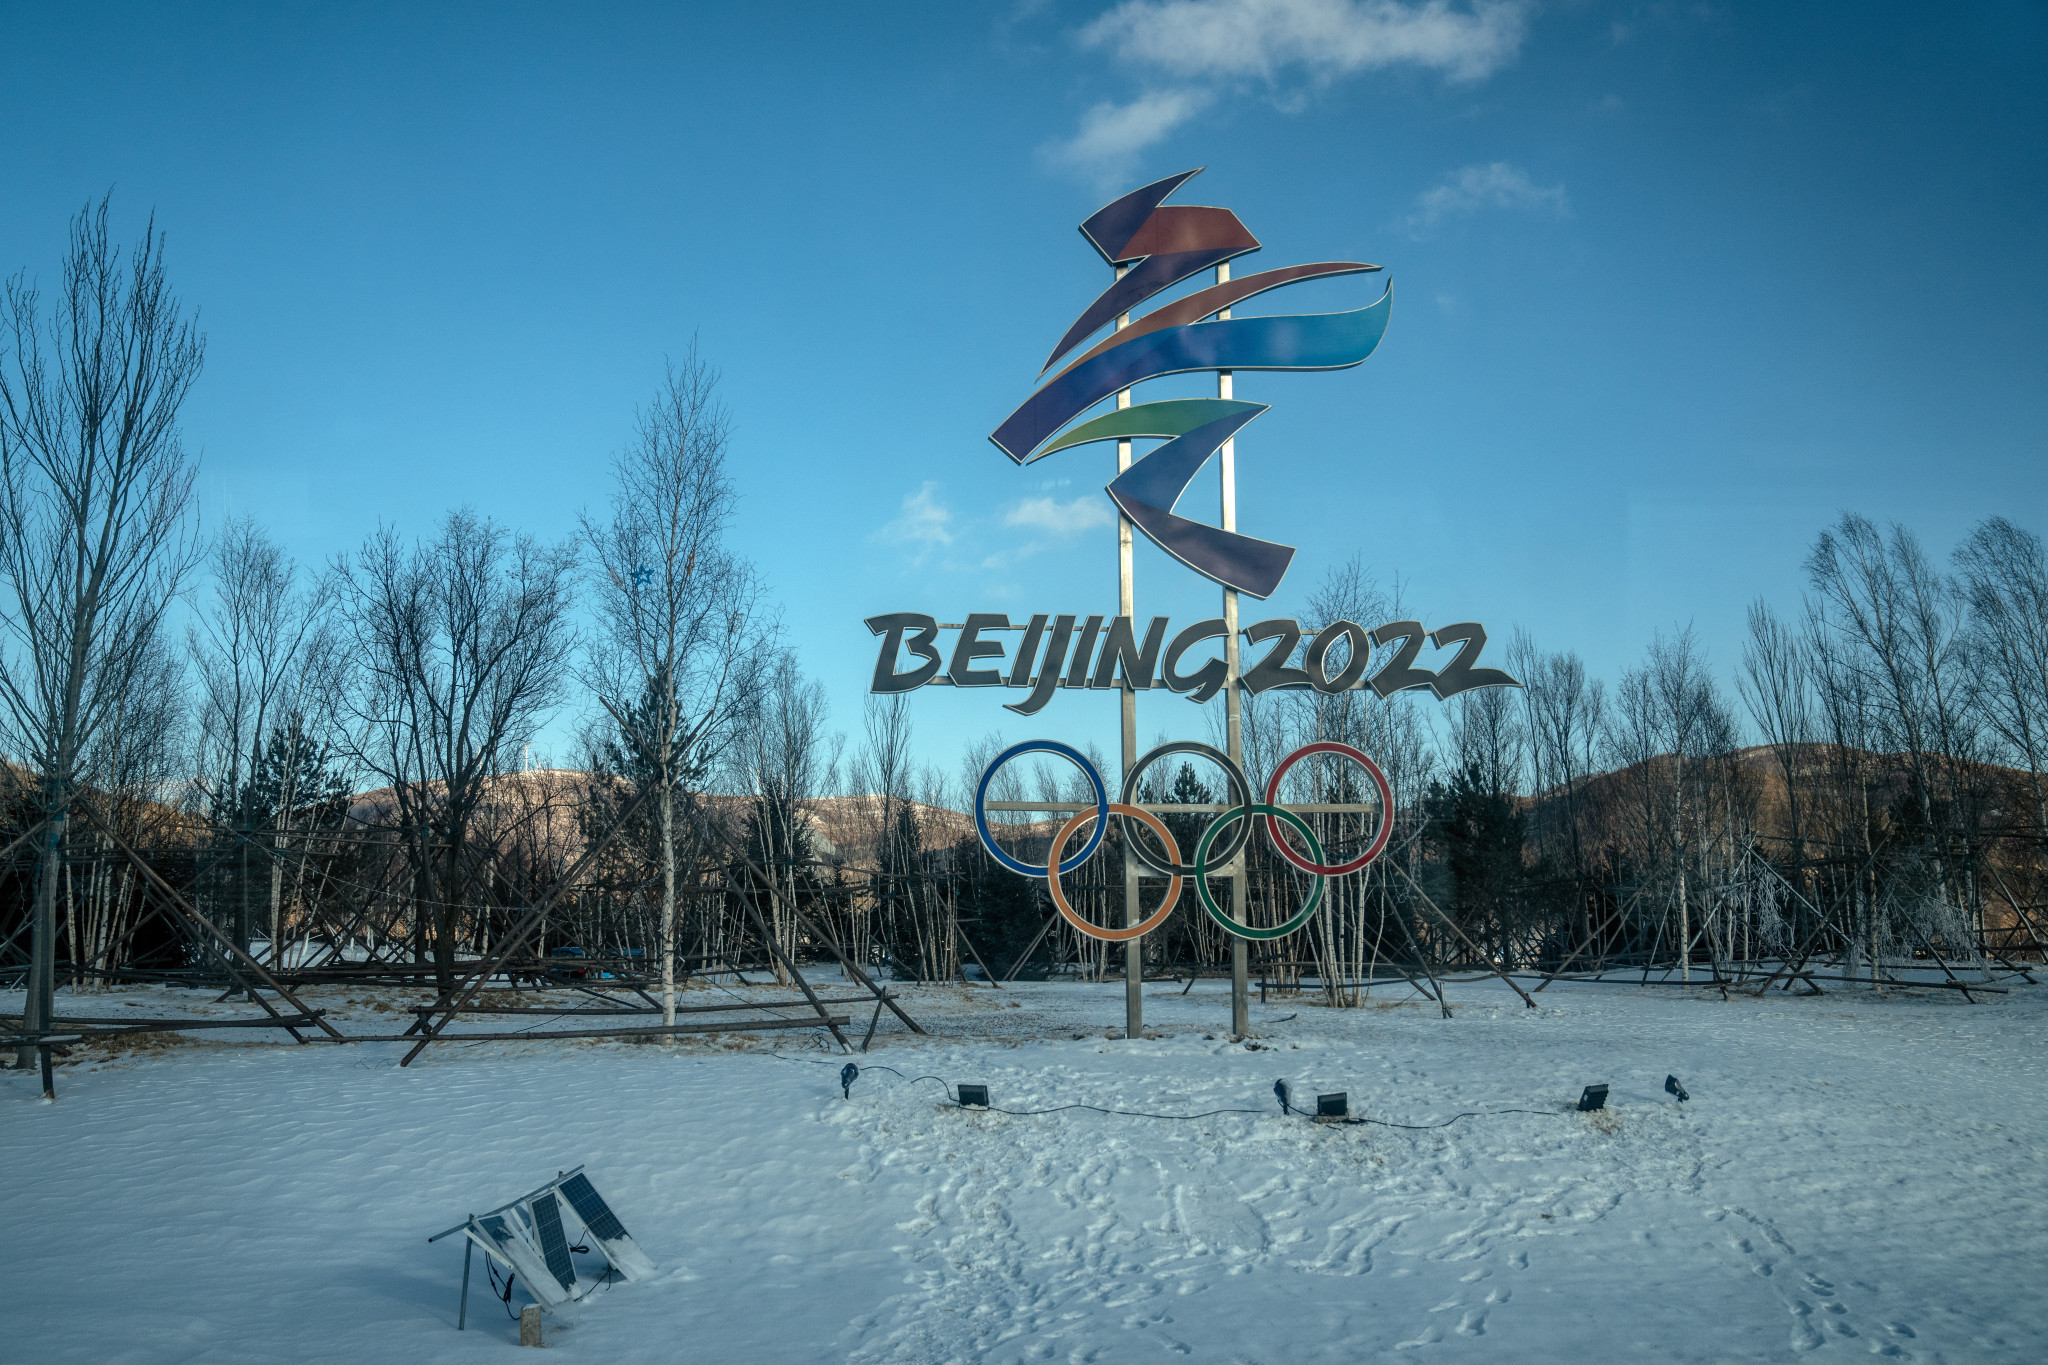 German Olympic team hit by first COVID-19 case after arriving for Beijing 2022